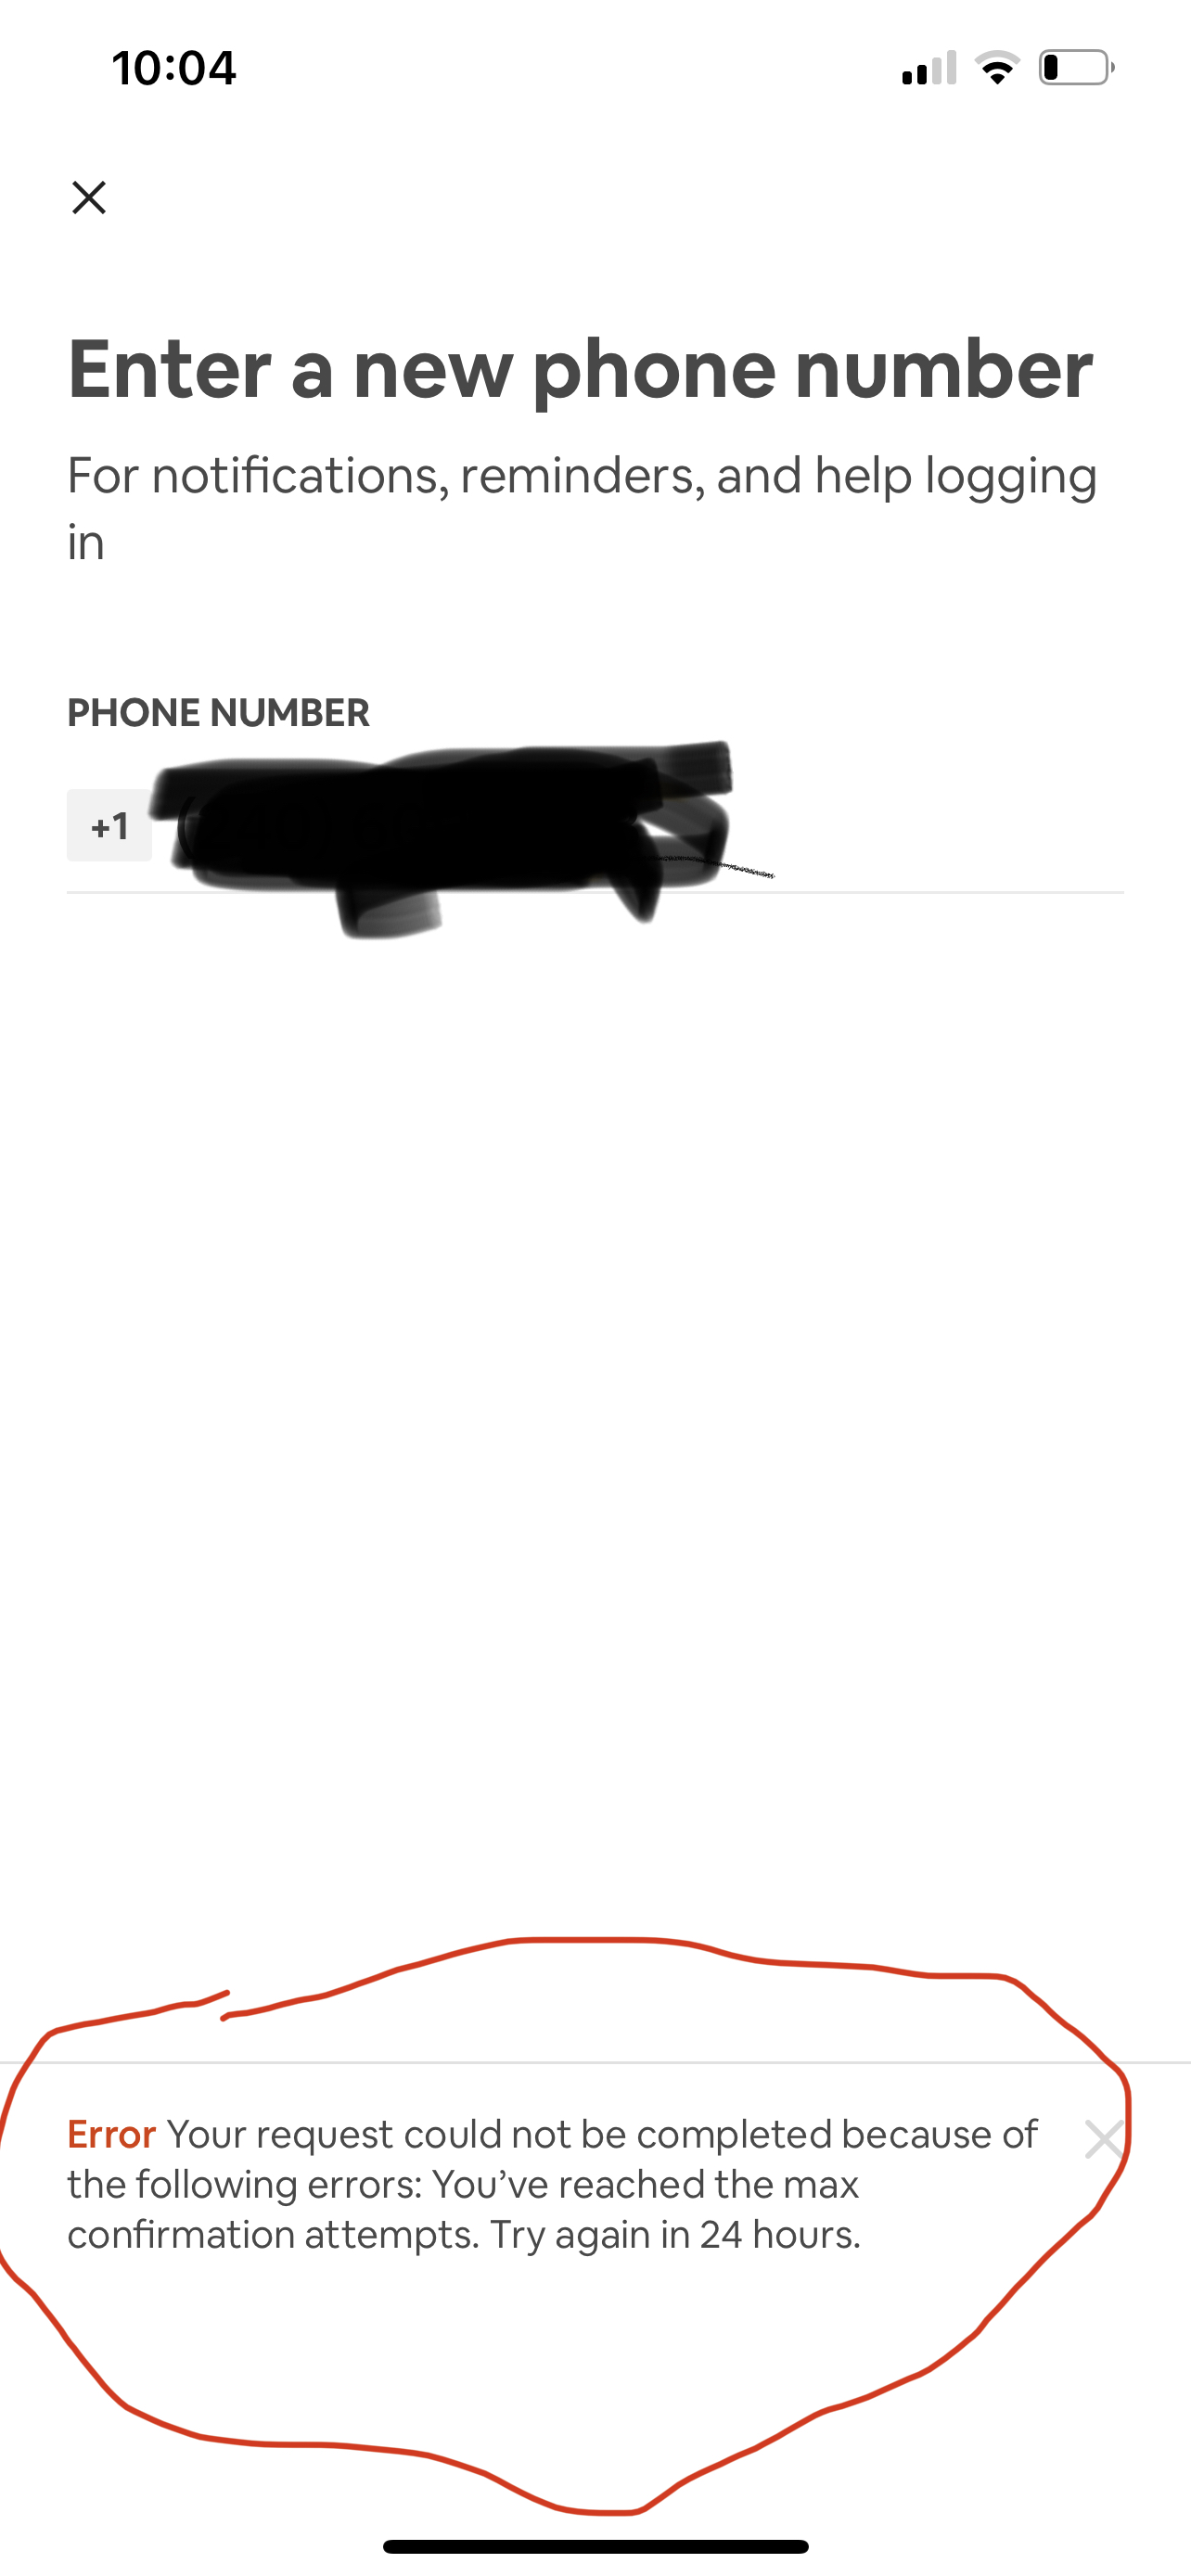 Why Won't Airbnb Take My Phone Number?